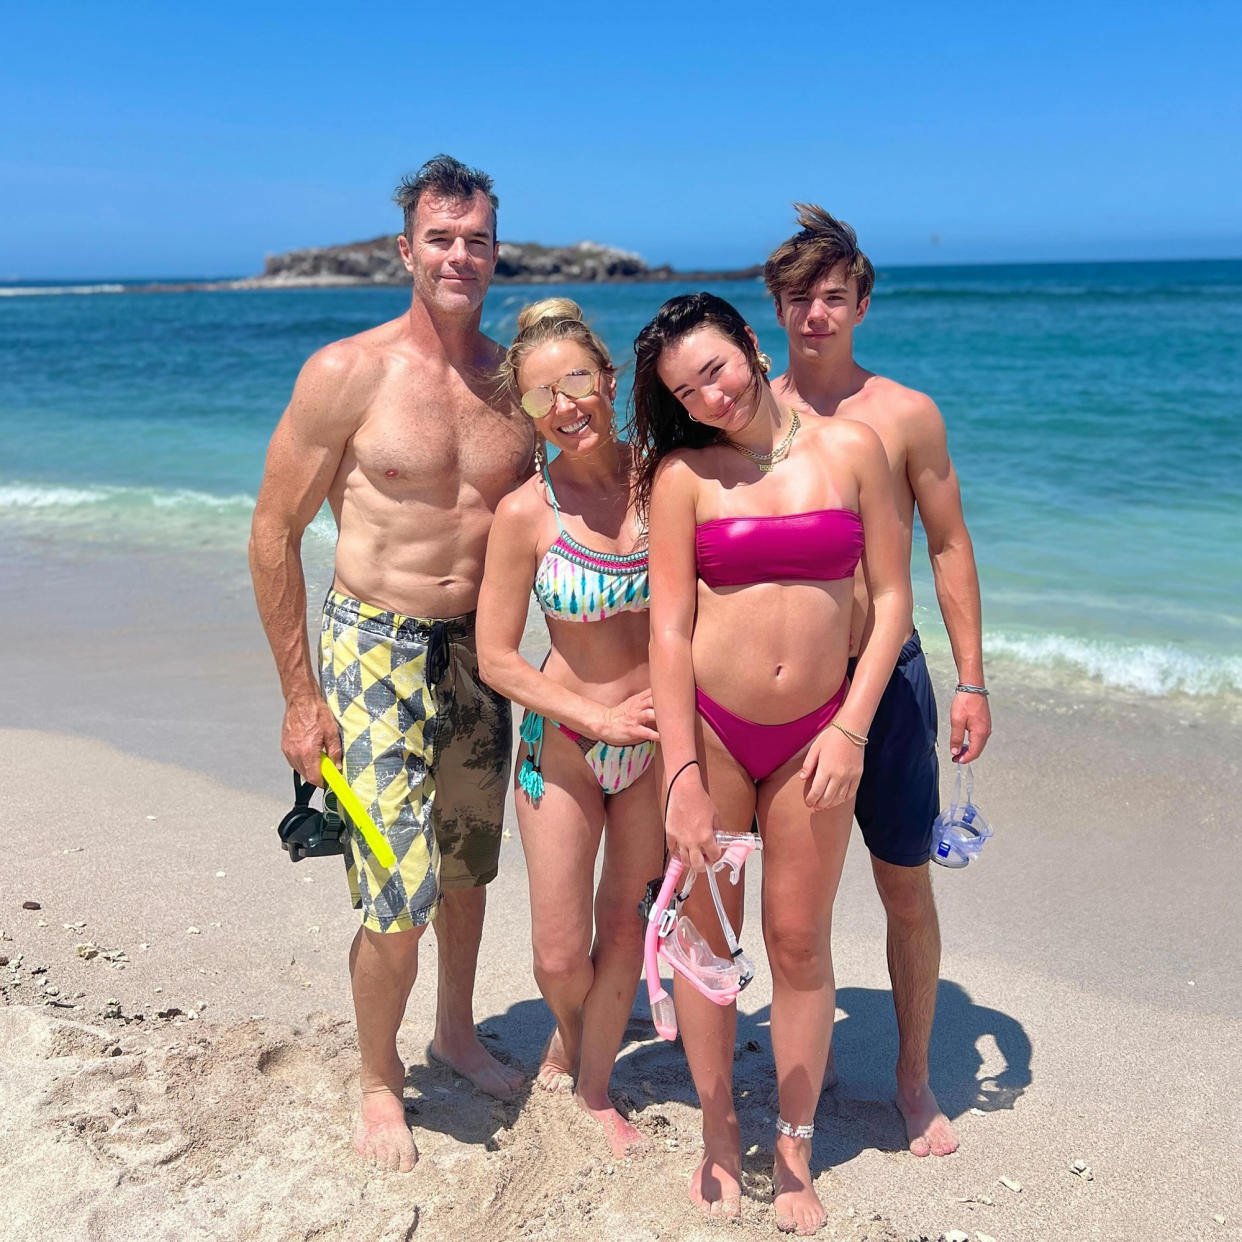 Trista Sutter and Family Are in Their ‘Relaxation’ and ‘Beach’ Era After She Returns Home